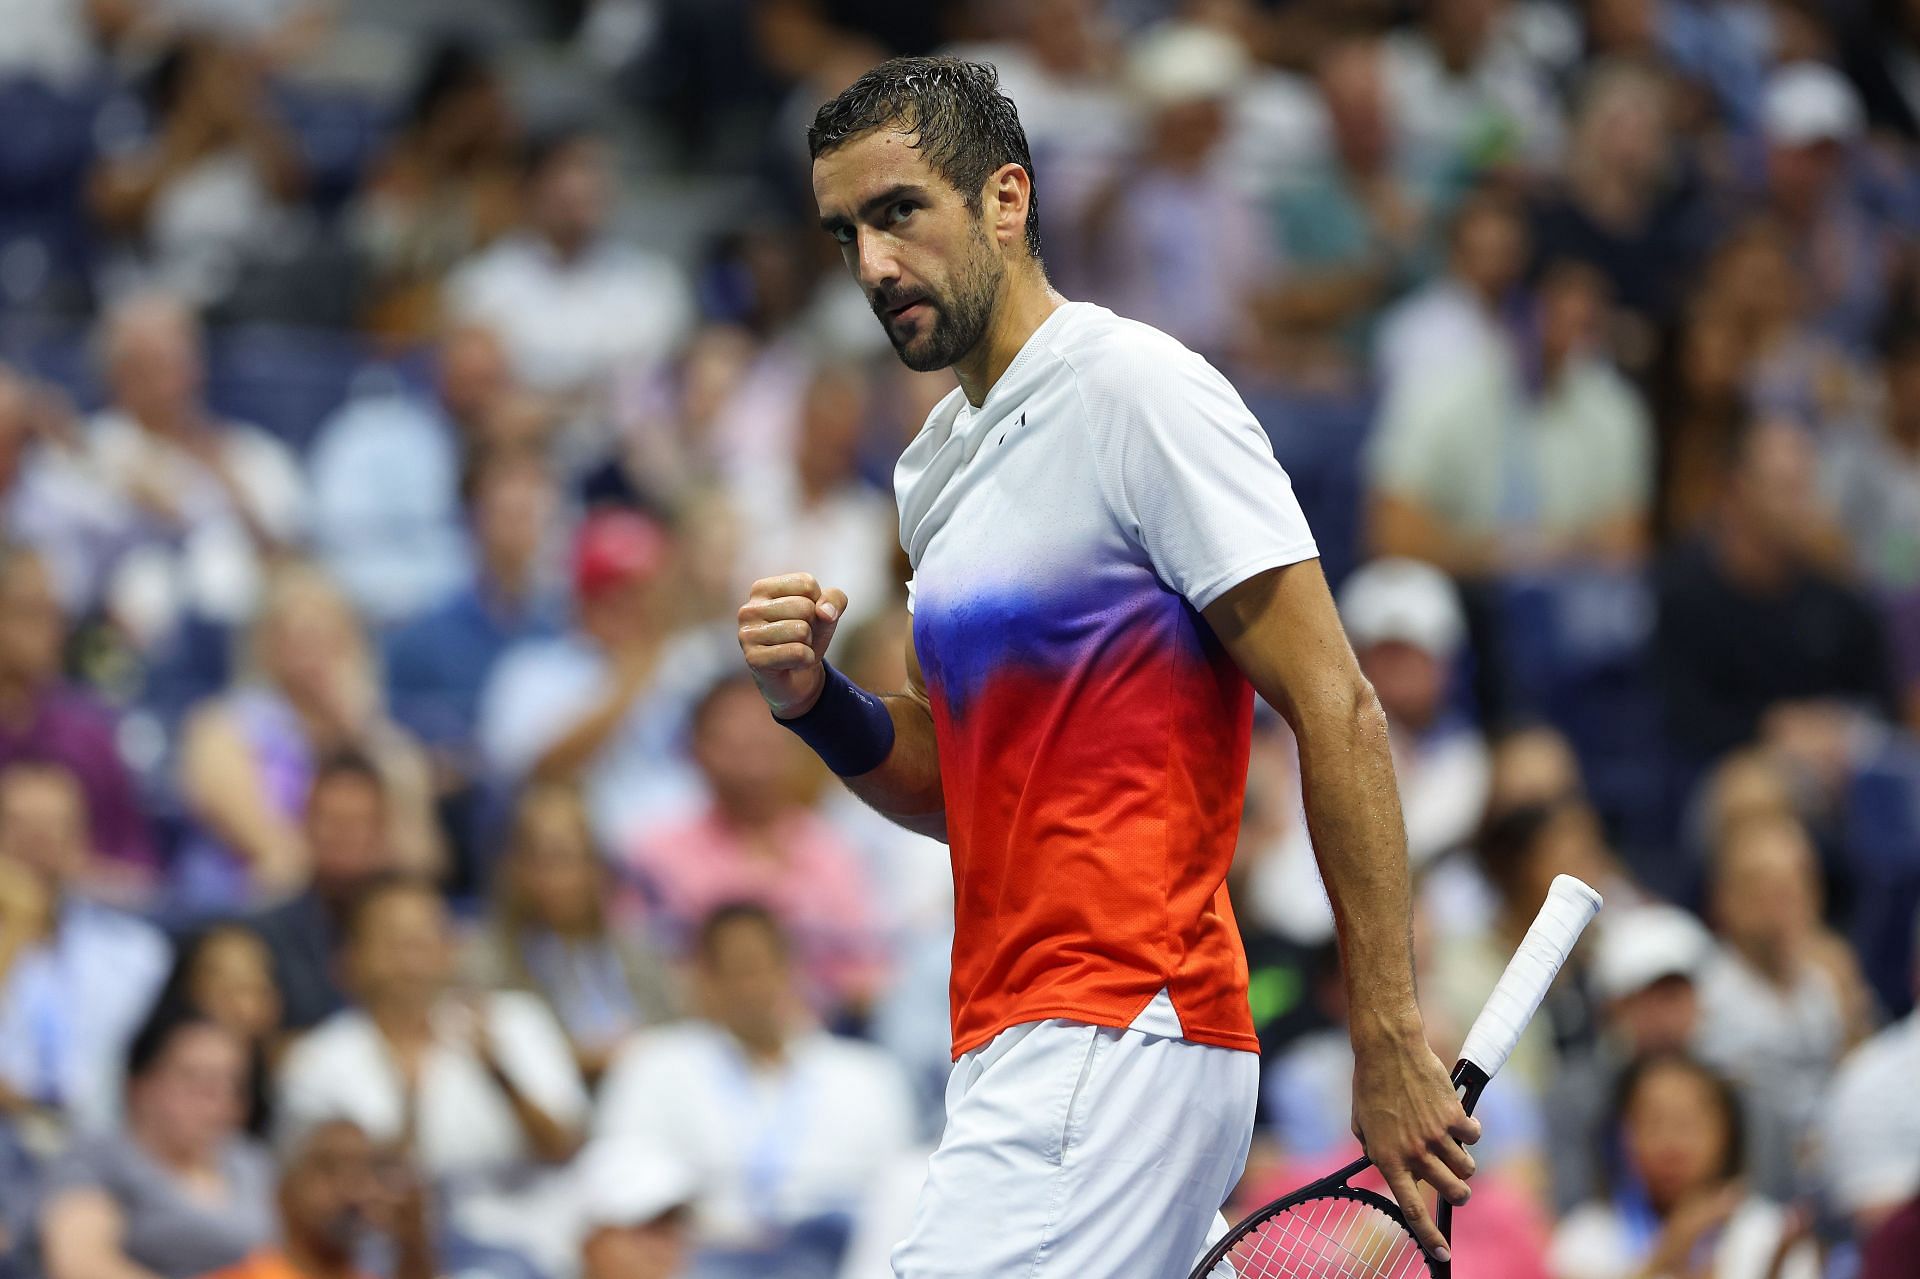 Marin Cilic at the 2022 US Open.